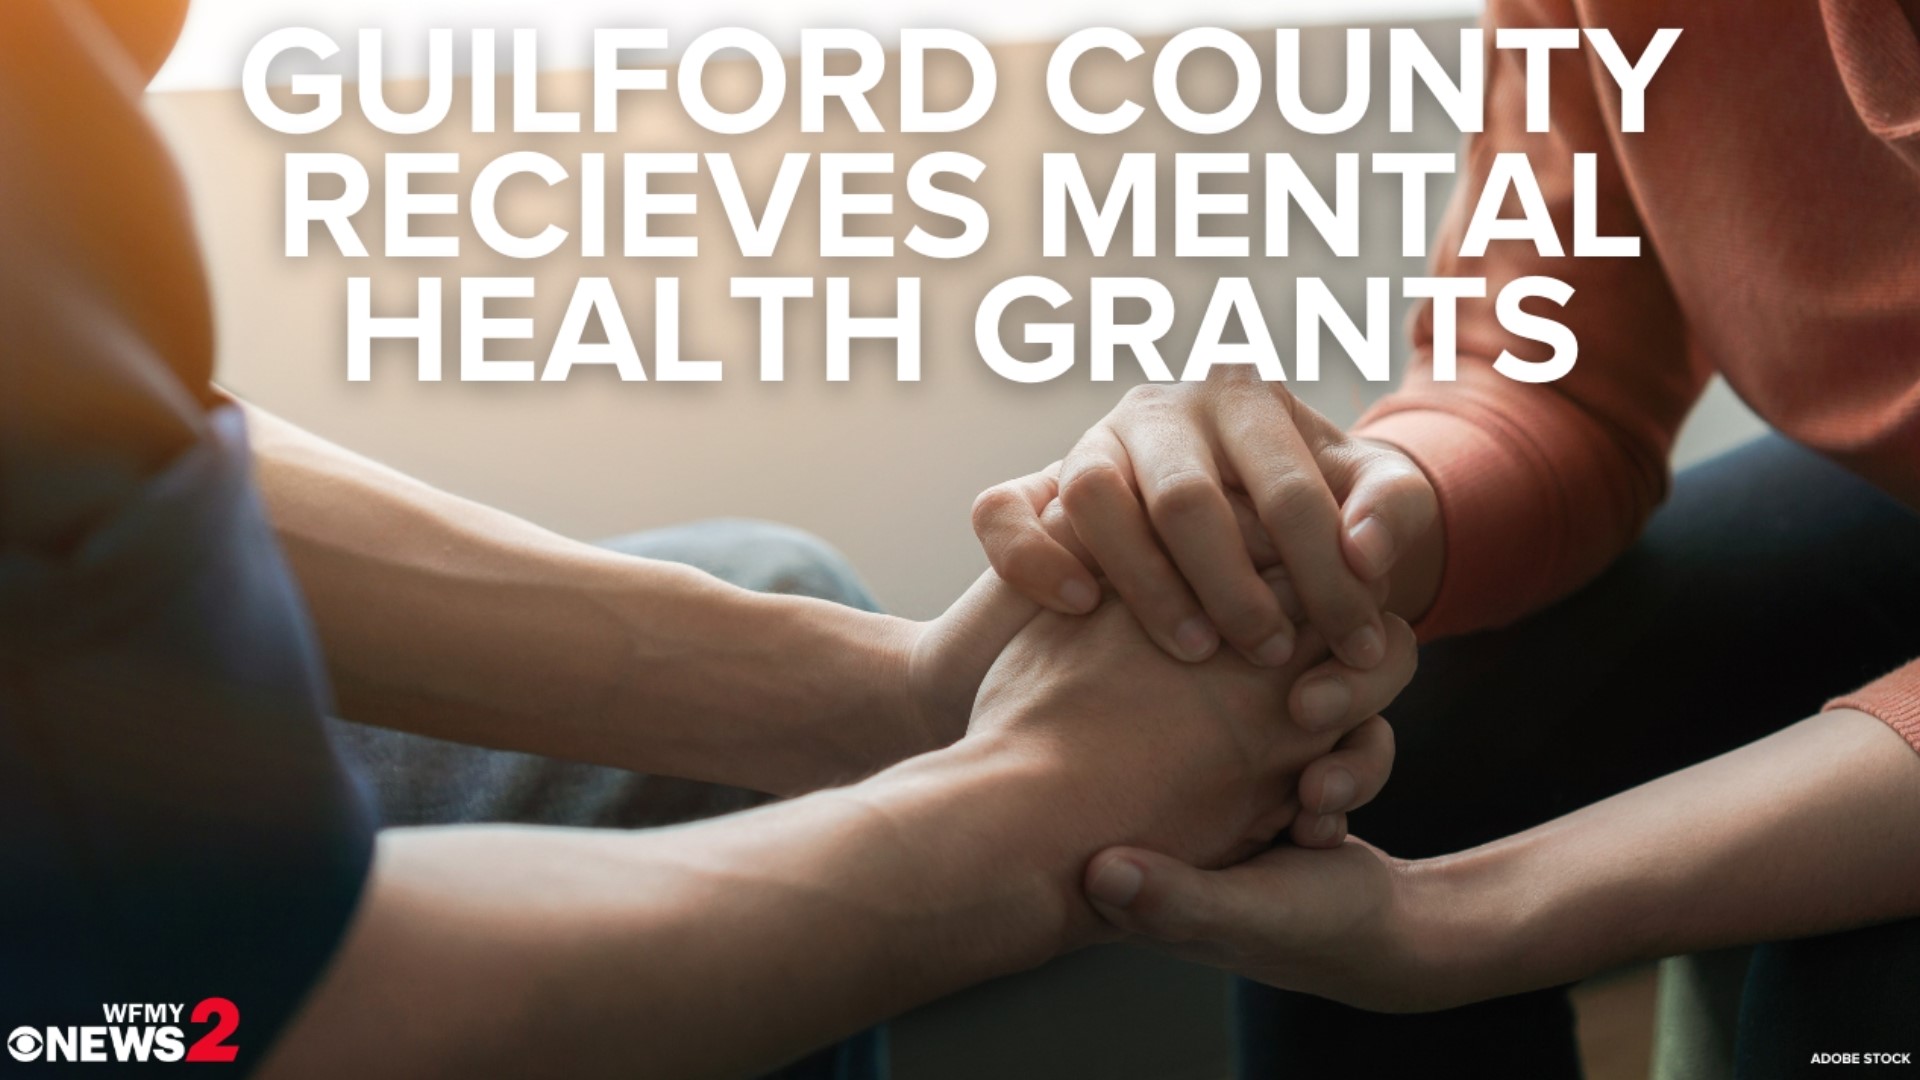 A federal grant worth nearly $15 million will allow Guilford County Schools (GCS) to expand its on-demand mental health resources for students.